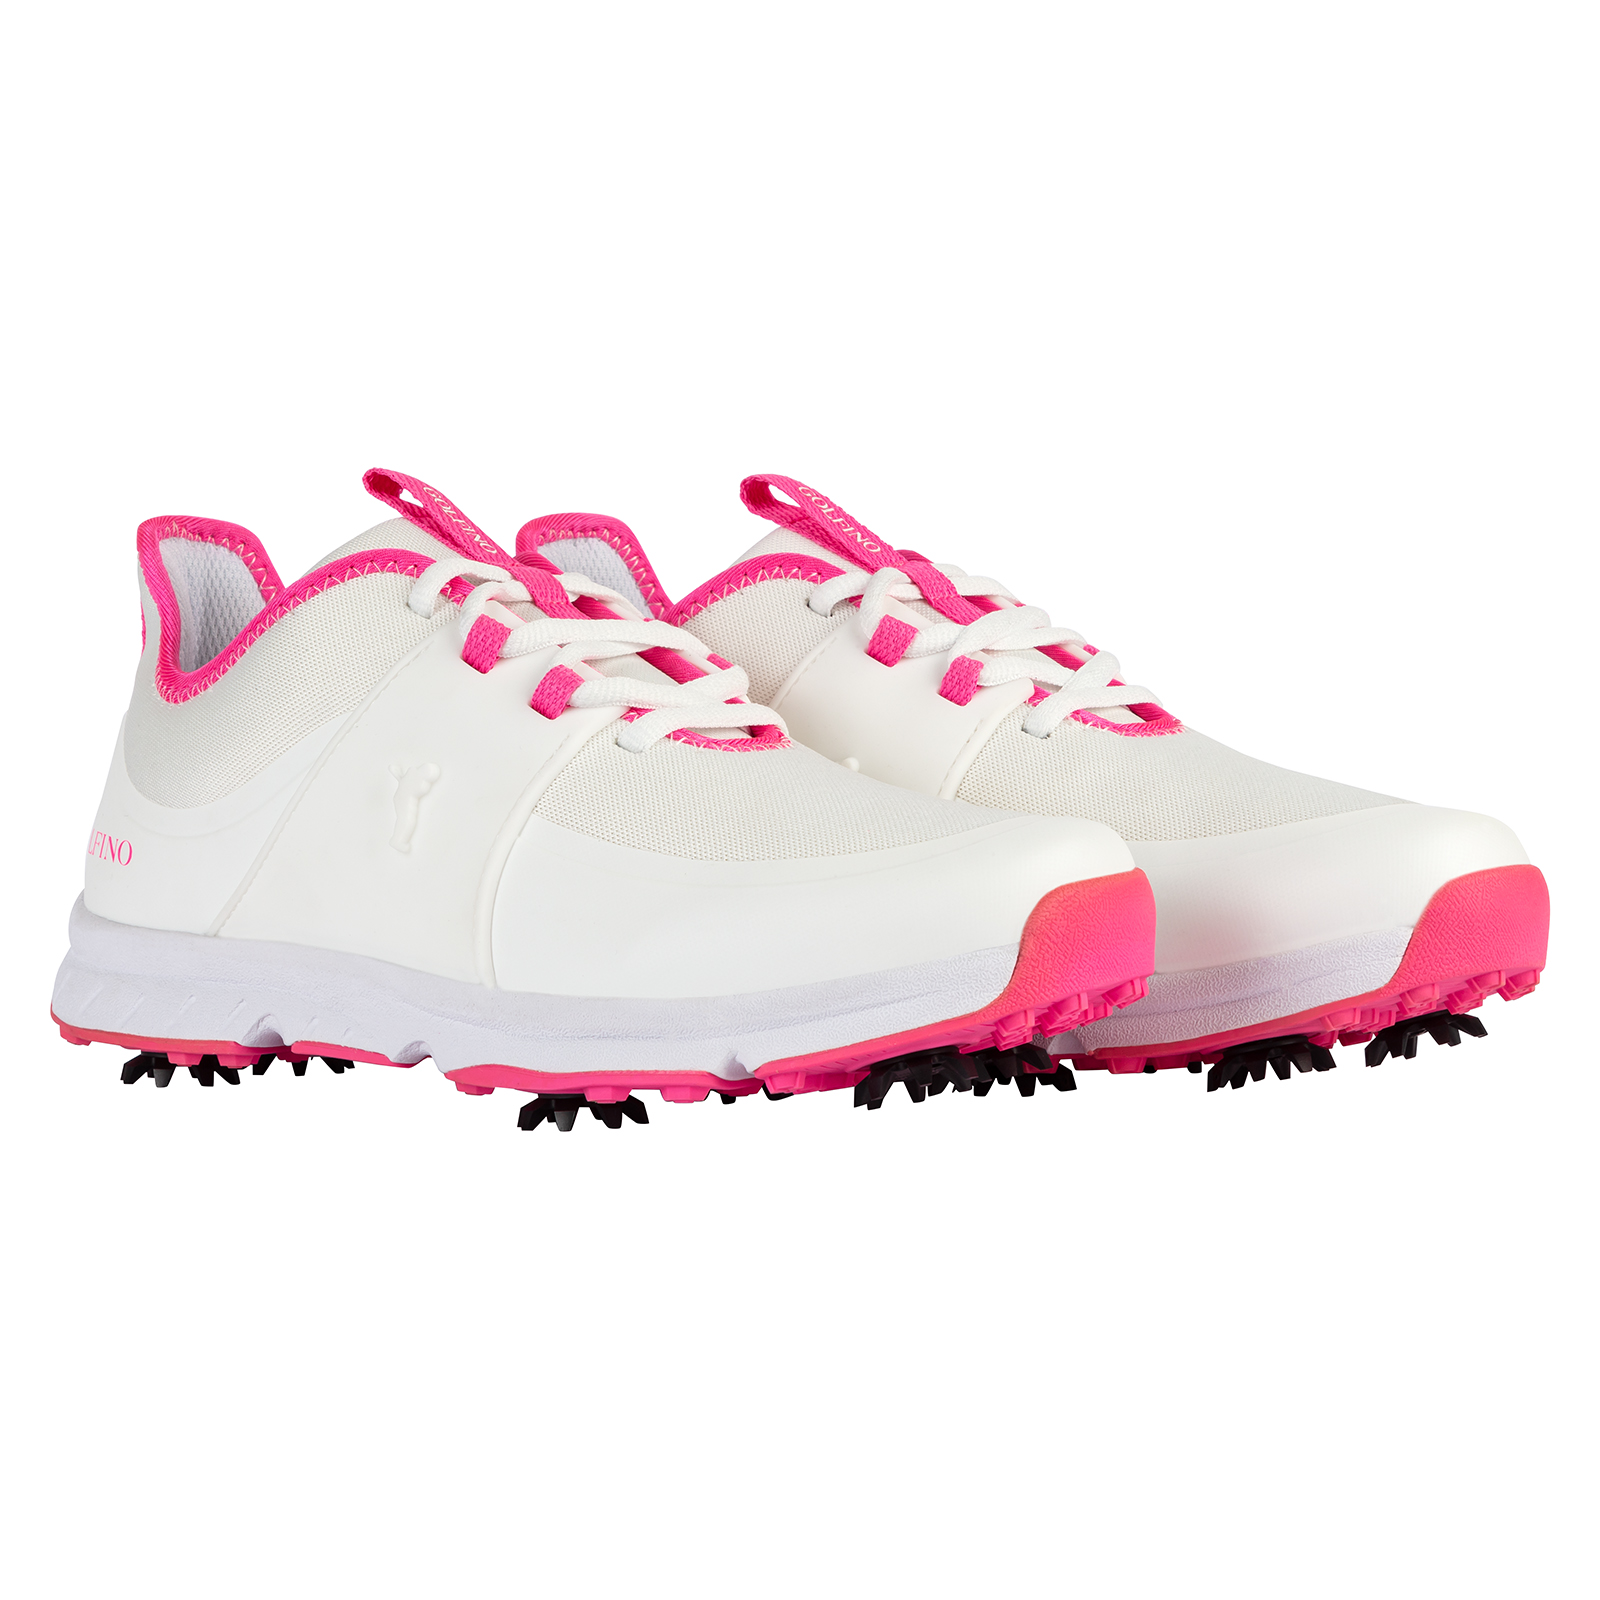 Ladies' waterproof golf shoes with removable spikes